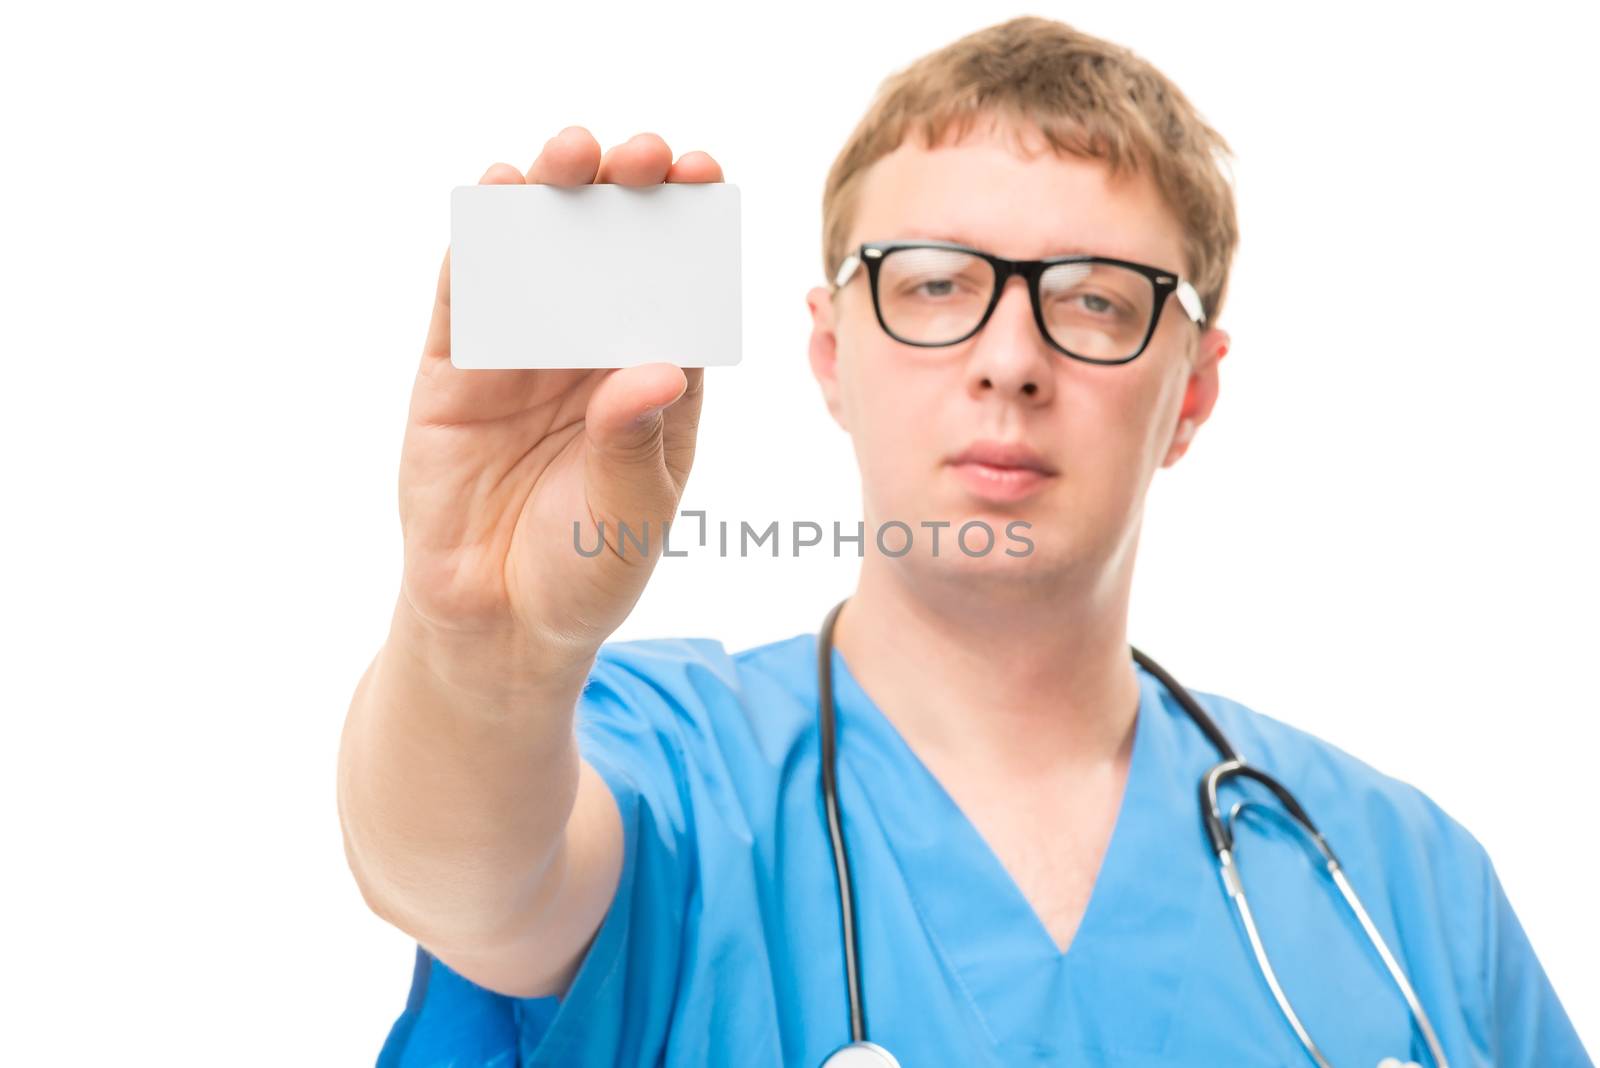 Male doctor shows a small blank for advertising focus on the hand